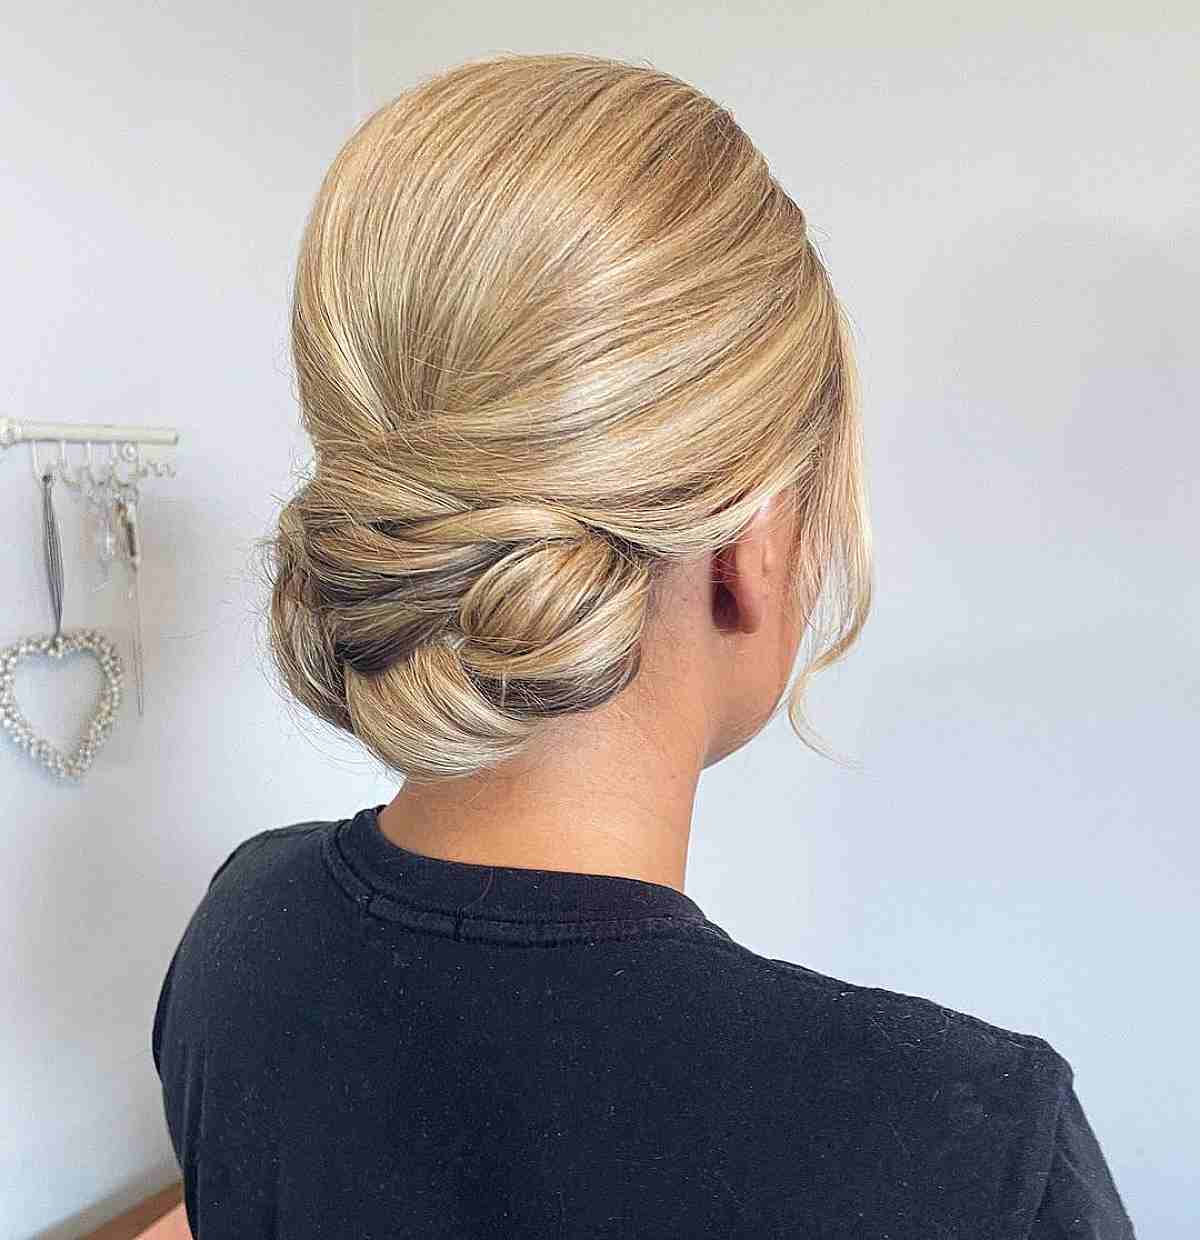 Cool twisted bun hairstyle for a casual day